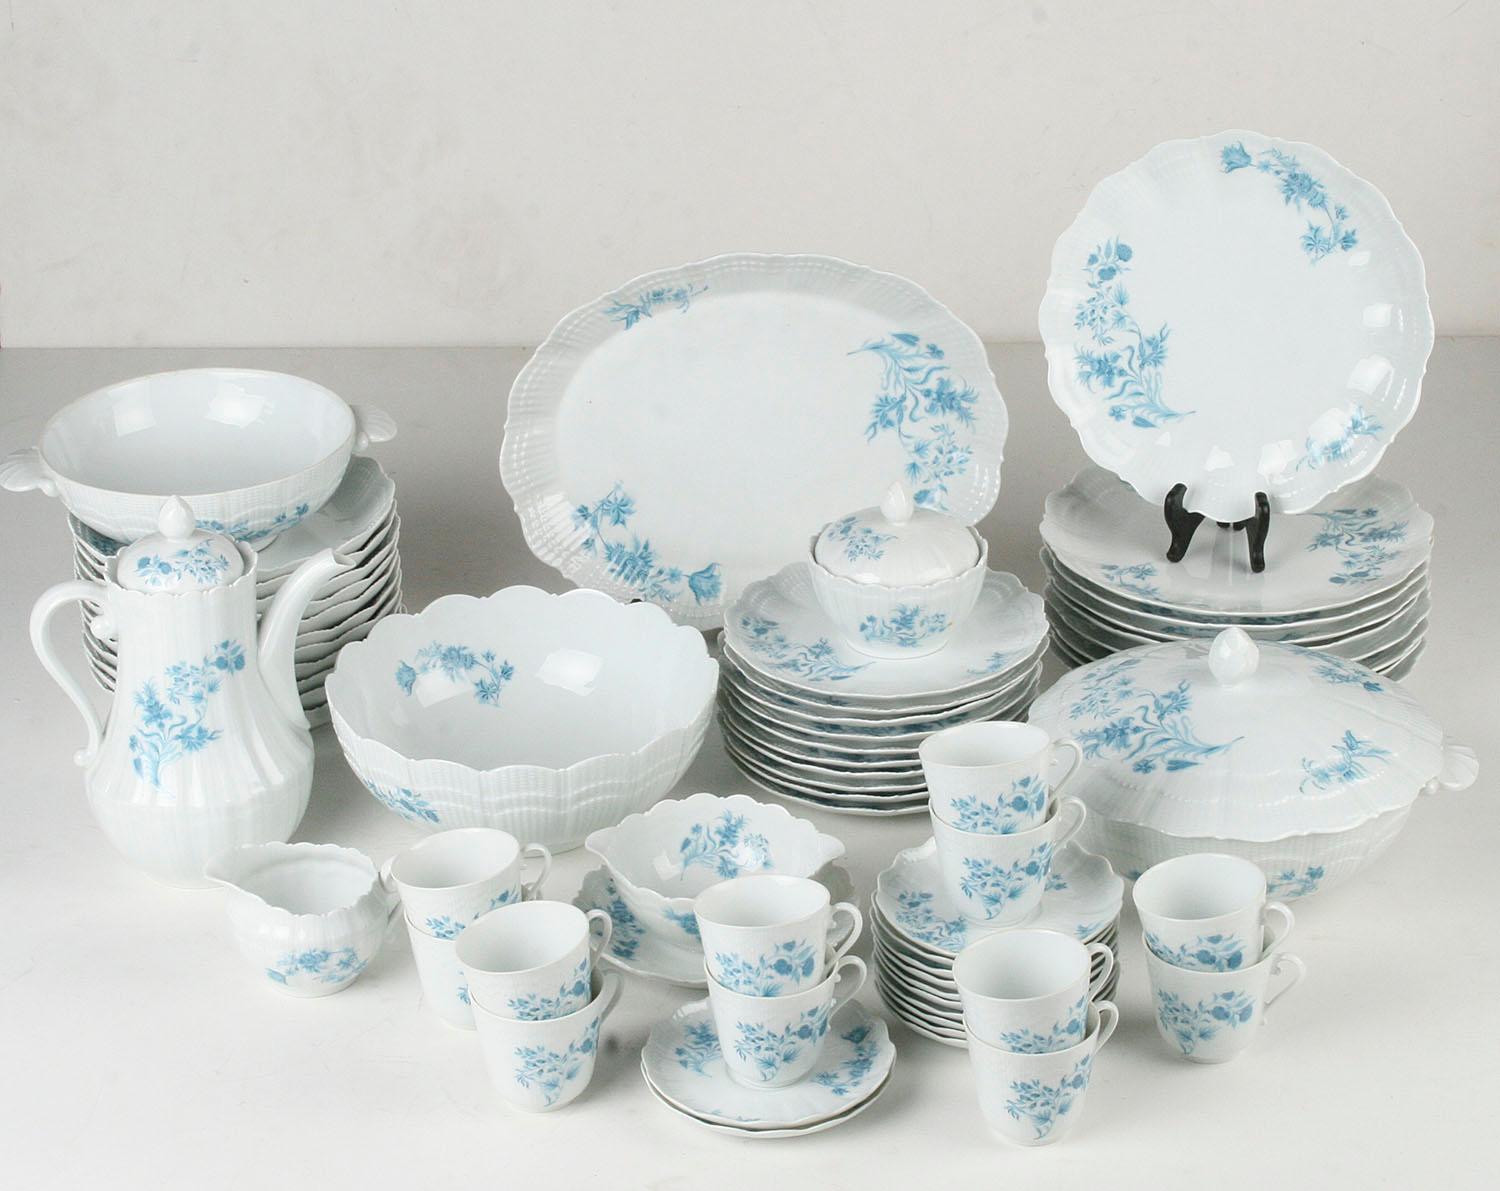 Beautiful set of porcelain dinner and tea ware, made by Giraud Limoges, France. 
The white porcelain is decorated with charming blue flowers. 
The set consist of the following pieces: 

10 breakfast plates Ø 20,5 cm 
12 cups and saucers, the